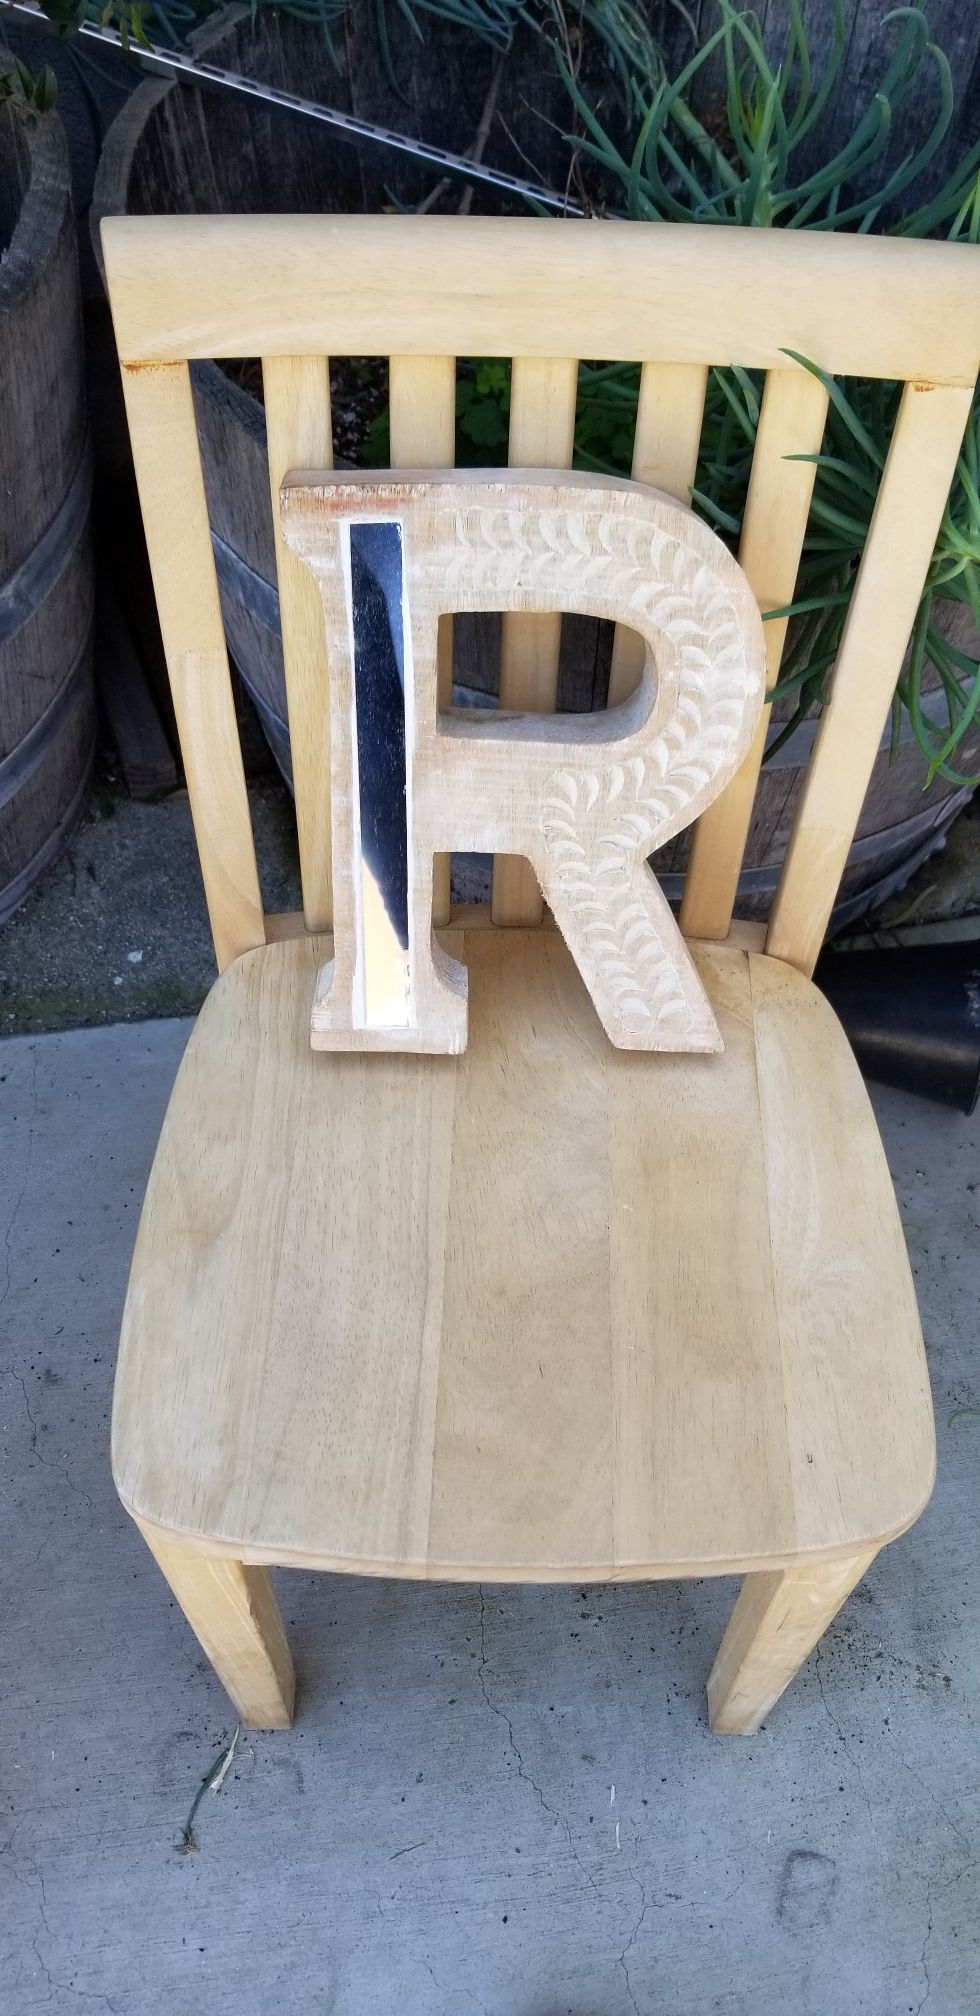 Wooden or metal letters